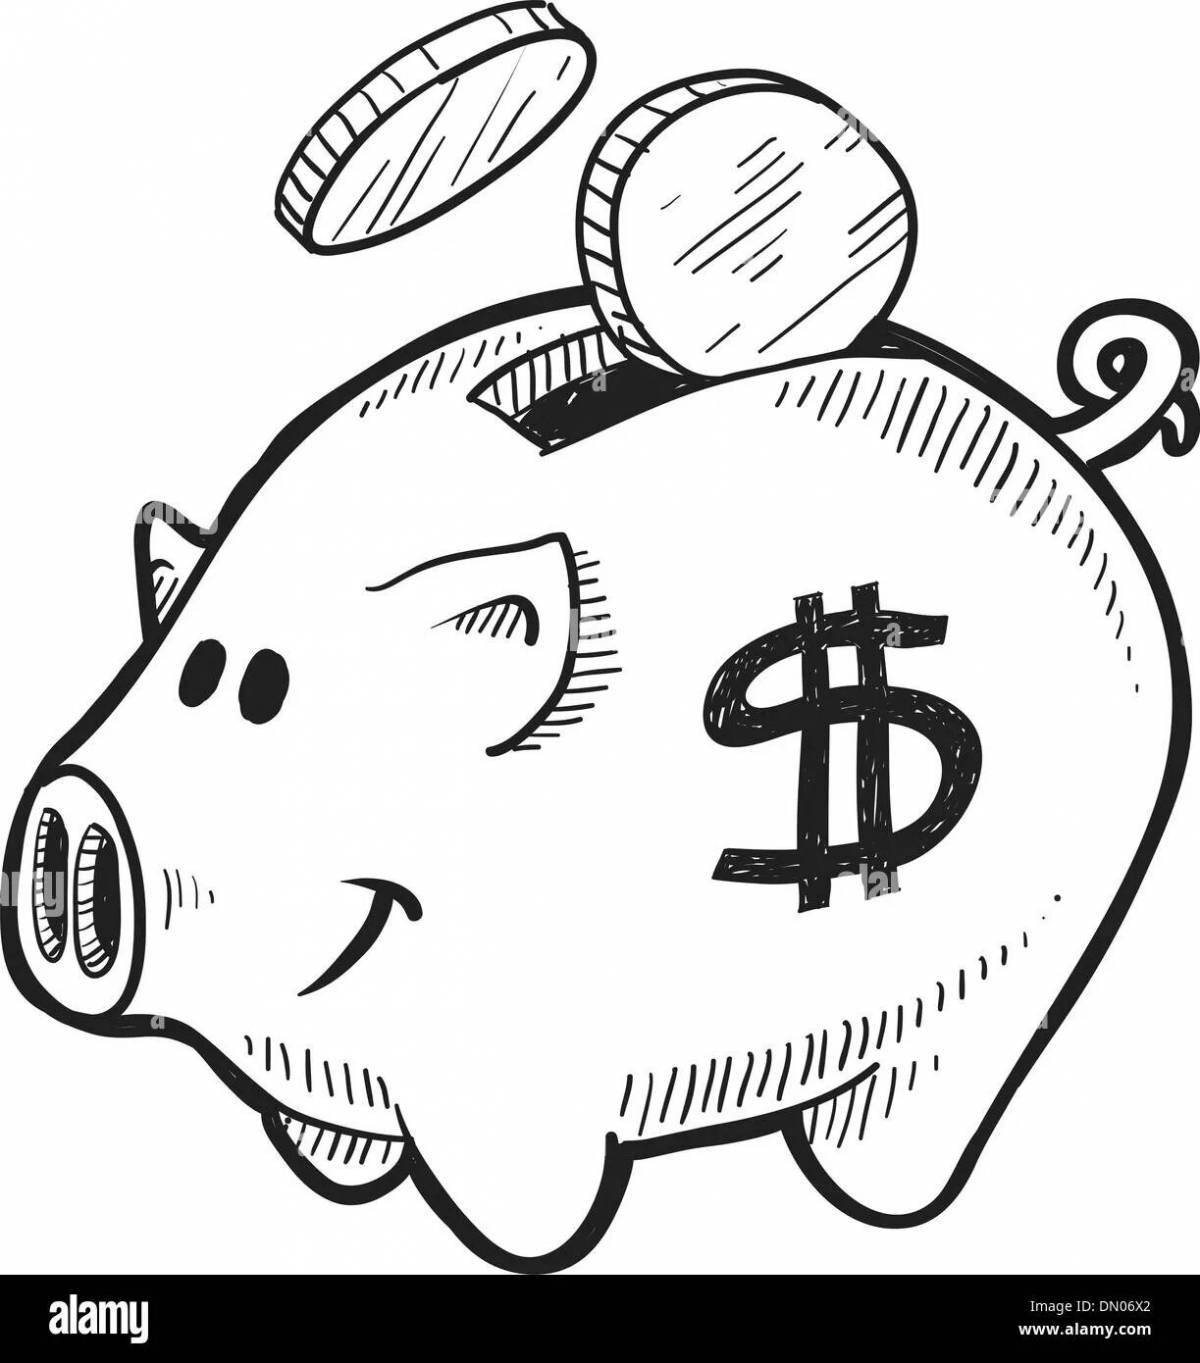 Colorful 3rd grade financial literacy coloring page